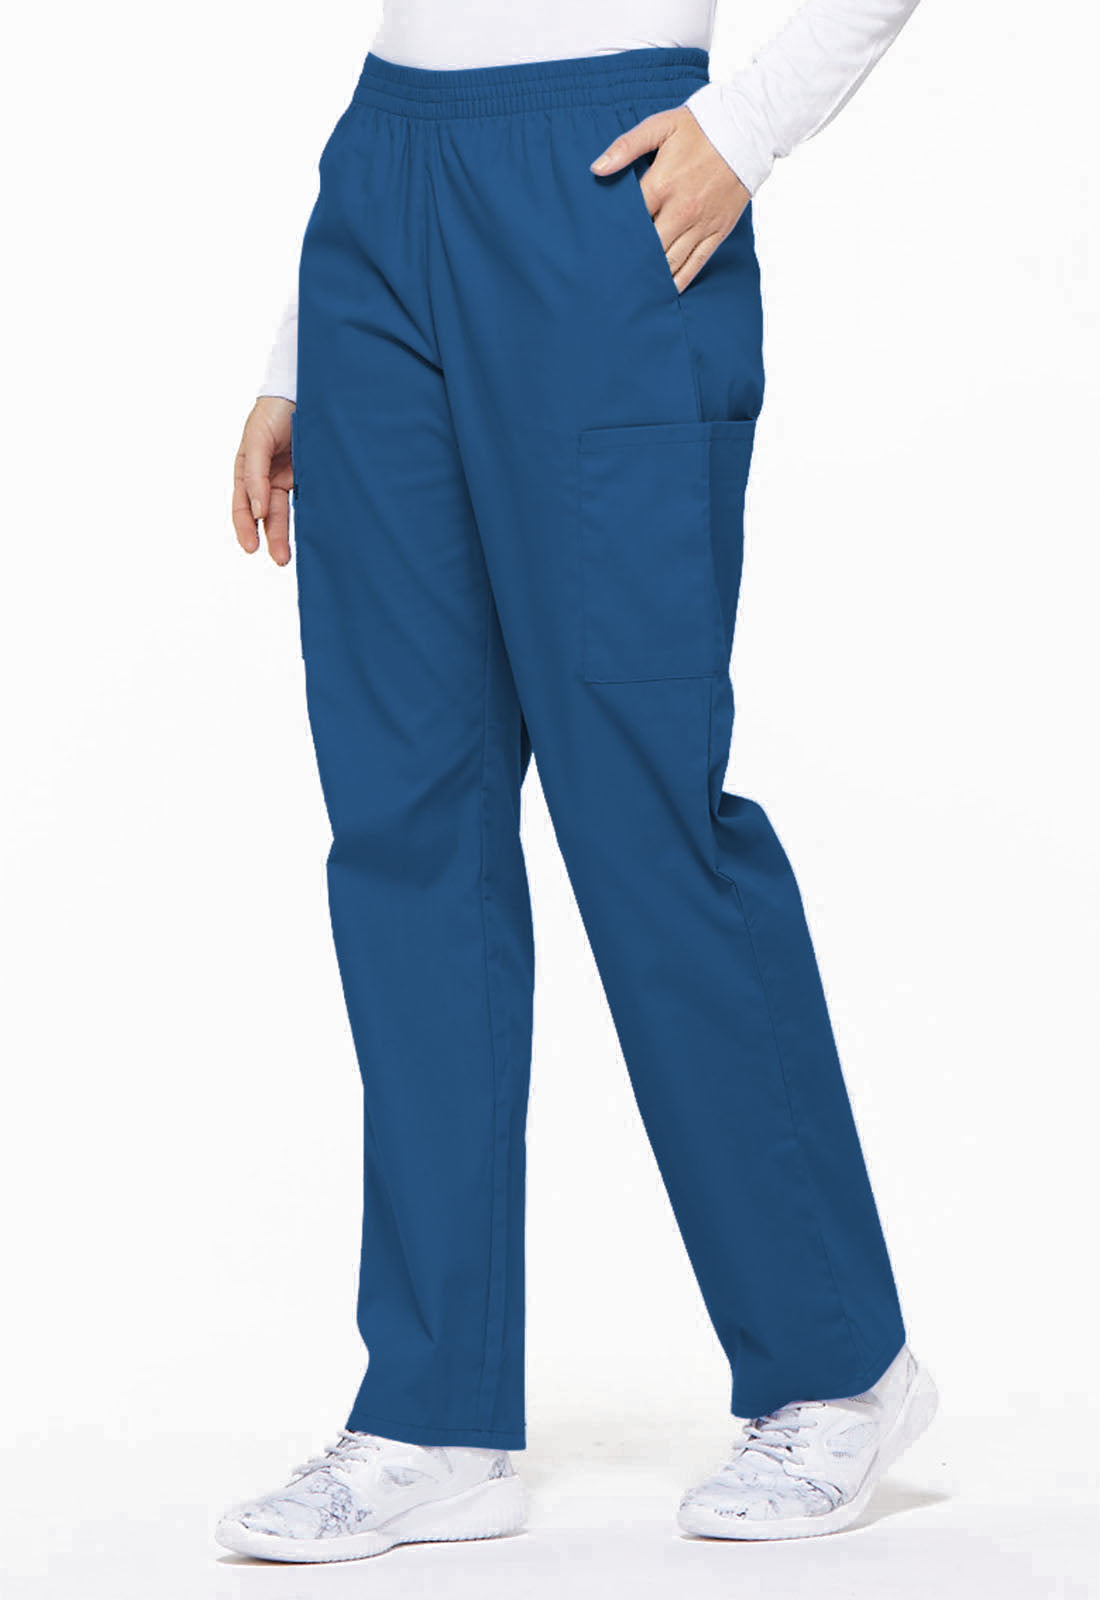 Exist. Conjunto Mujer Dickies EDS Signature Mod.86806/86106 Royal